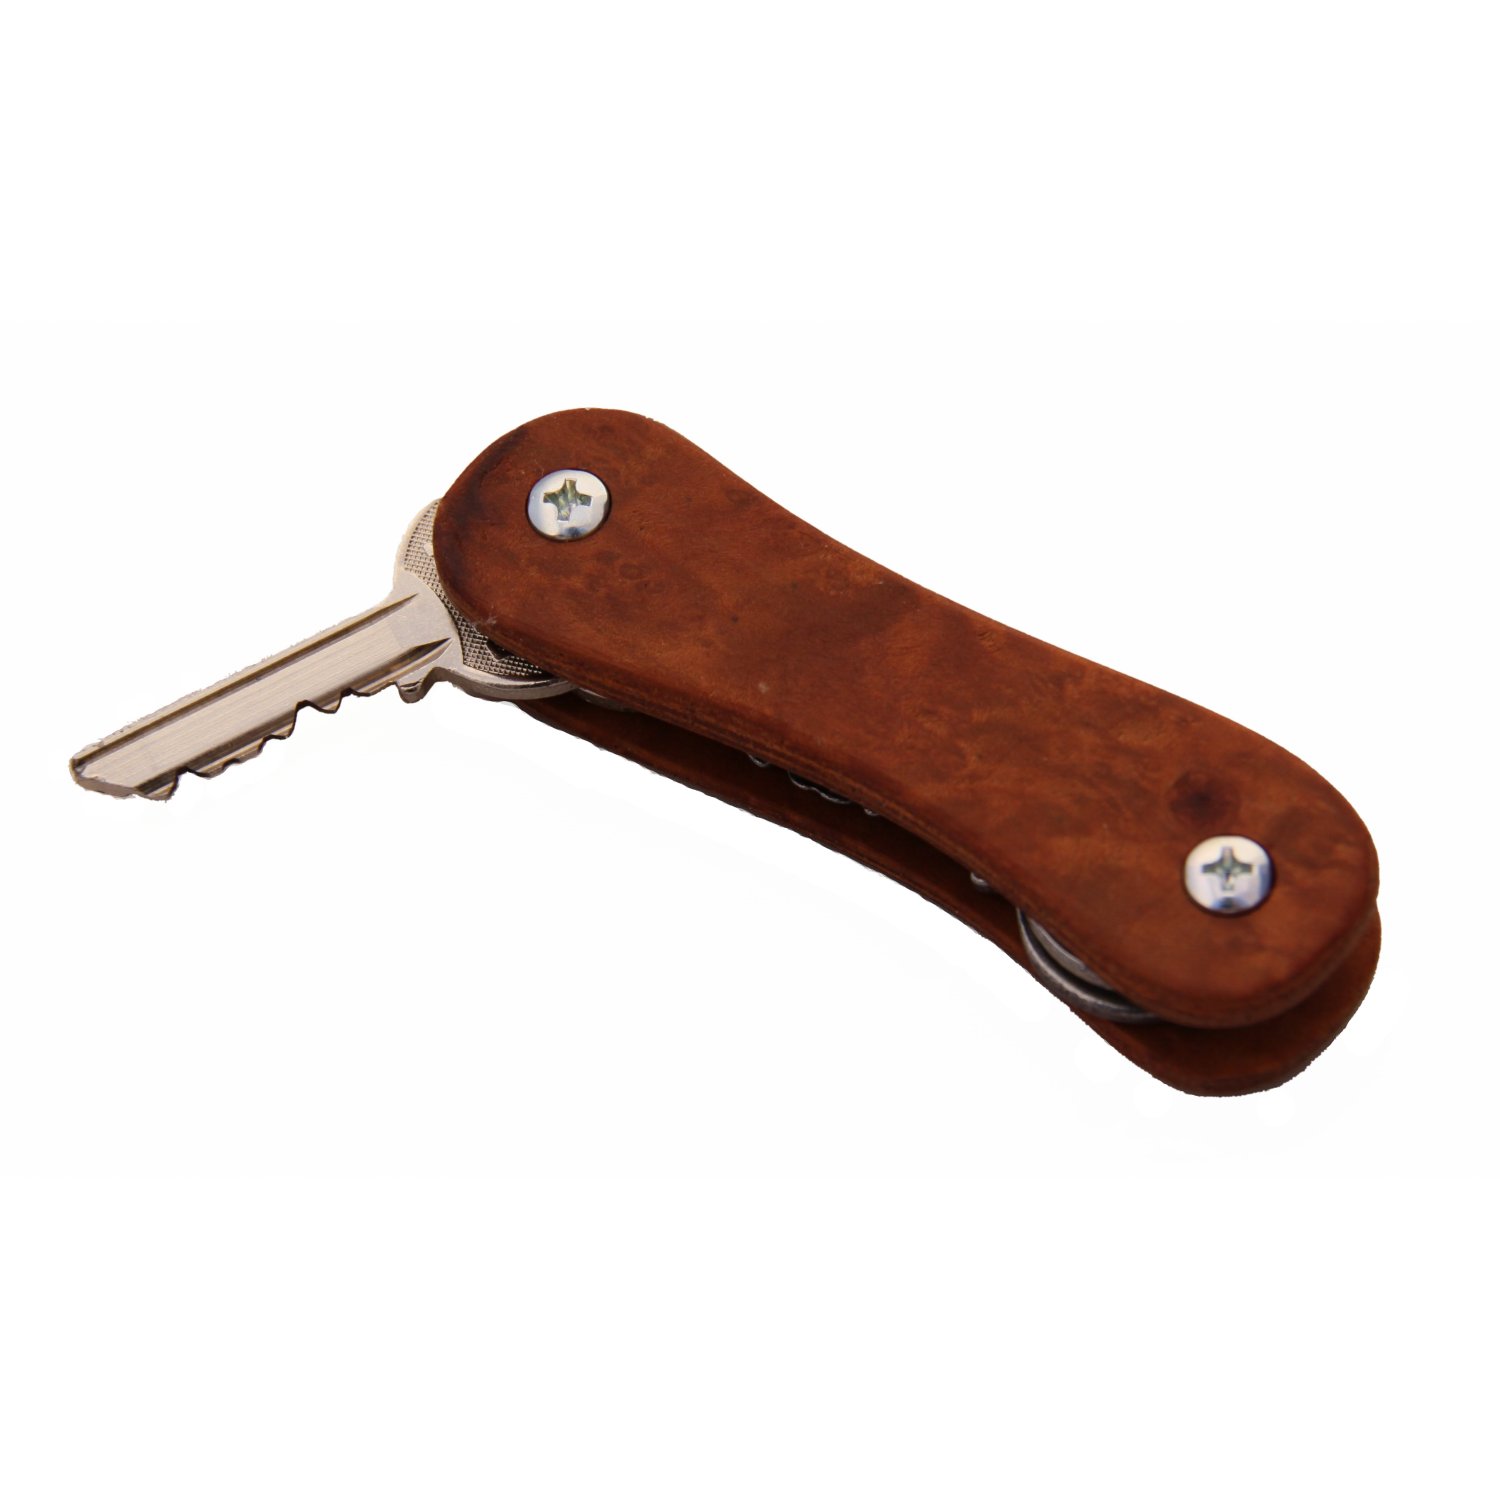 Wooden key cage